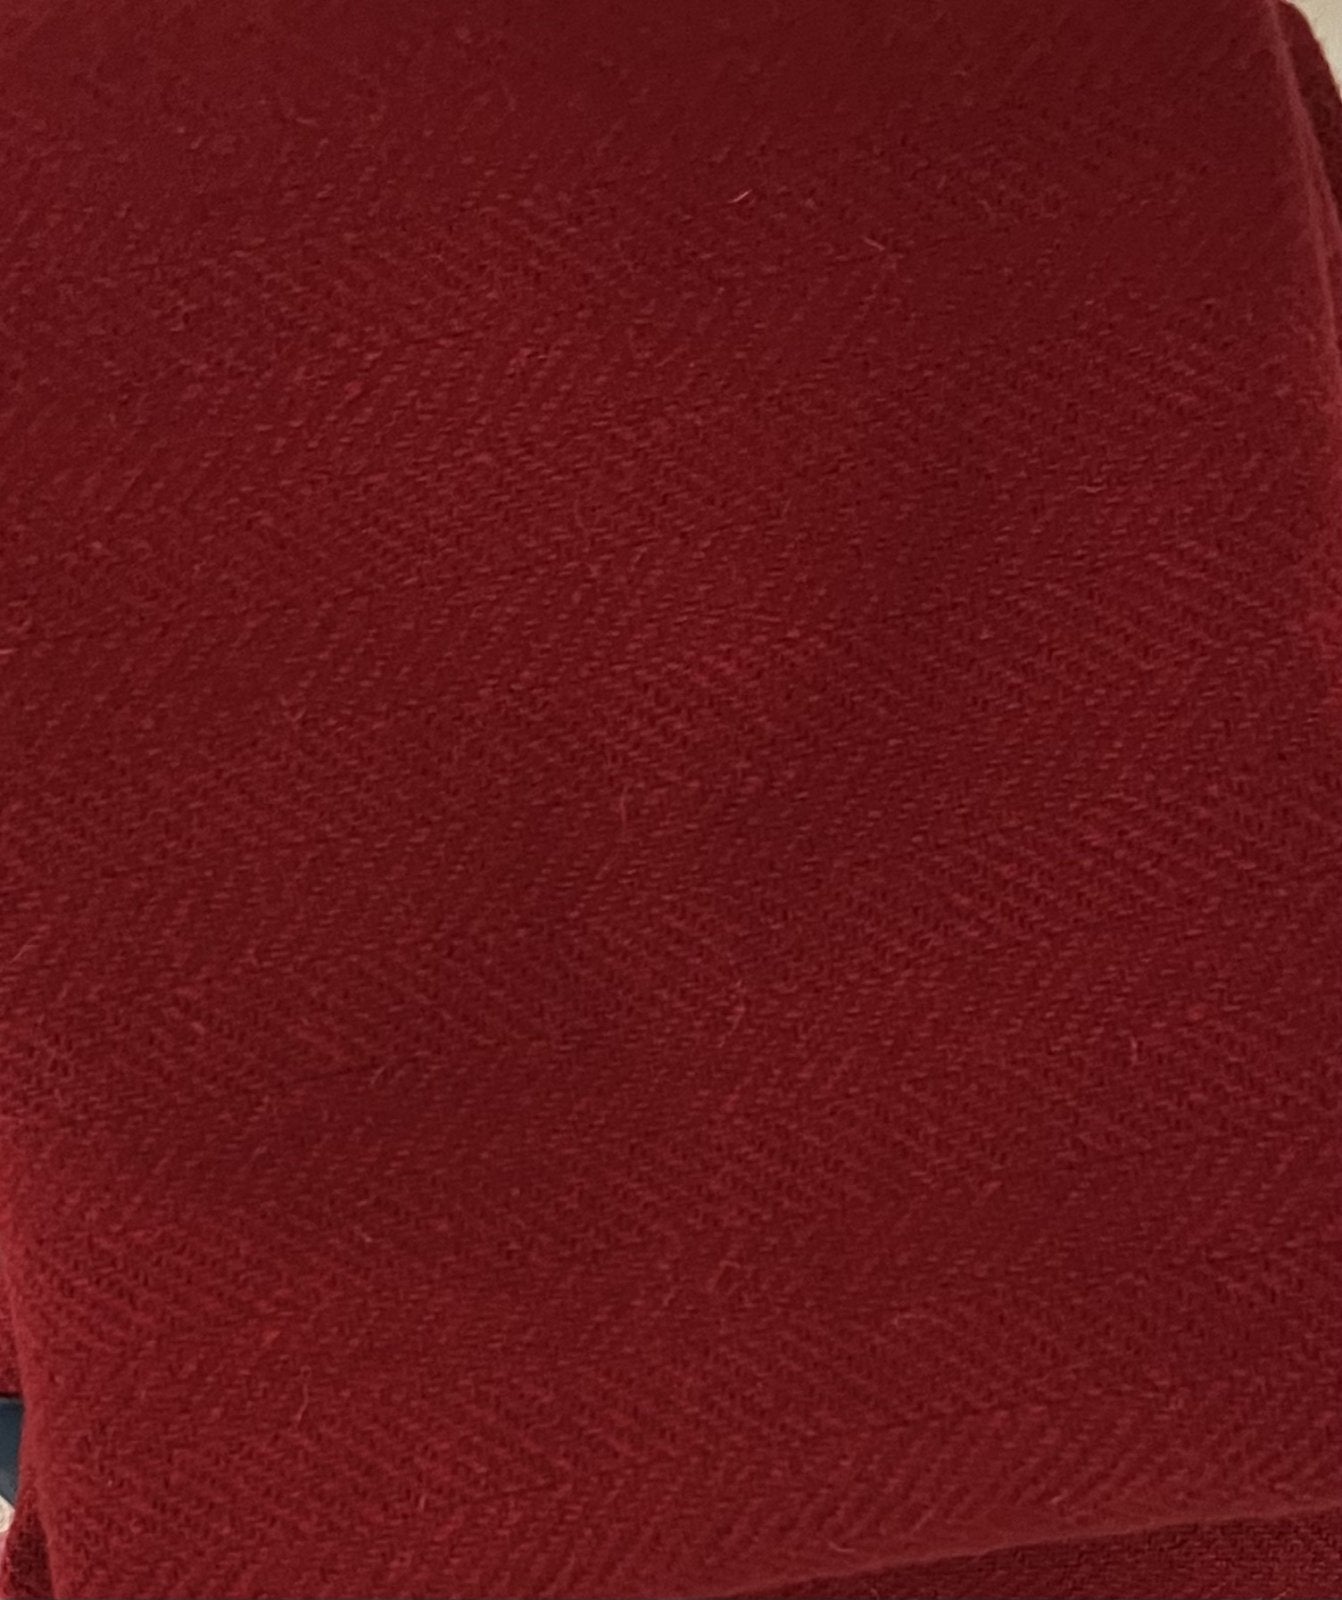 100% Wool Fabric - Lobster Red